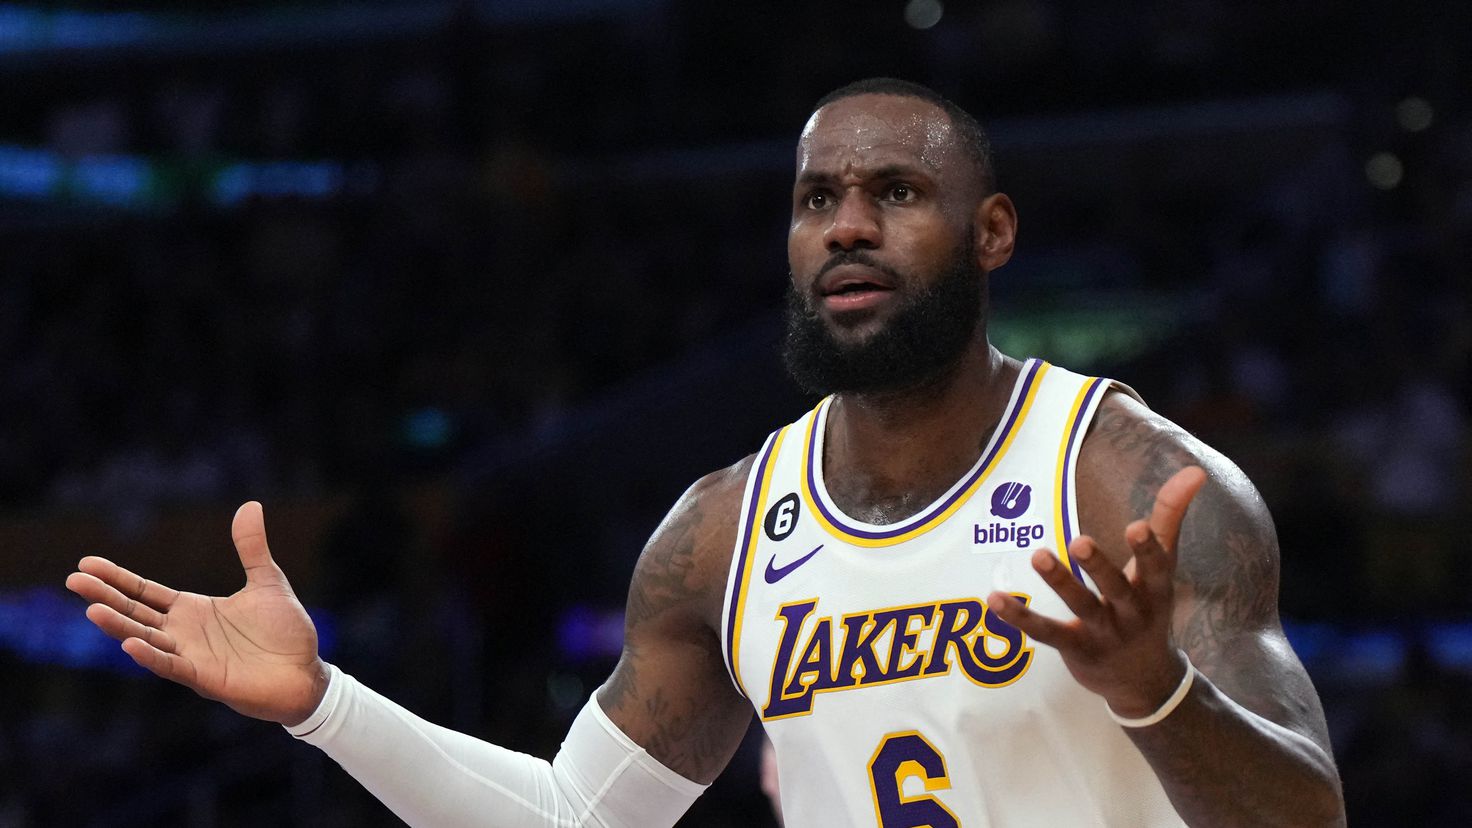  LeBron James has a strong clash with the referee and leaves him bleeding in the Lakers vs.  Nuggets
